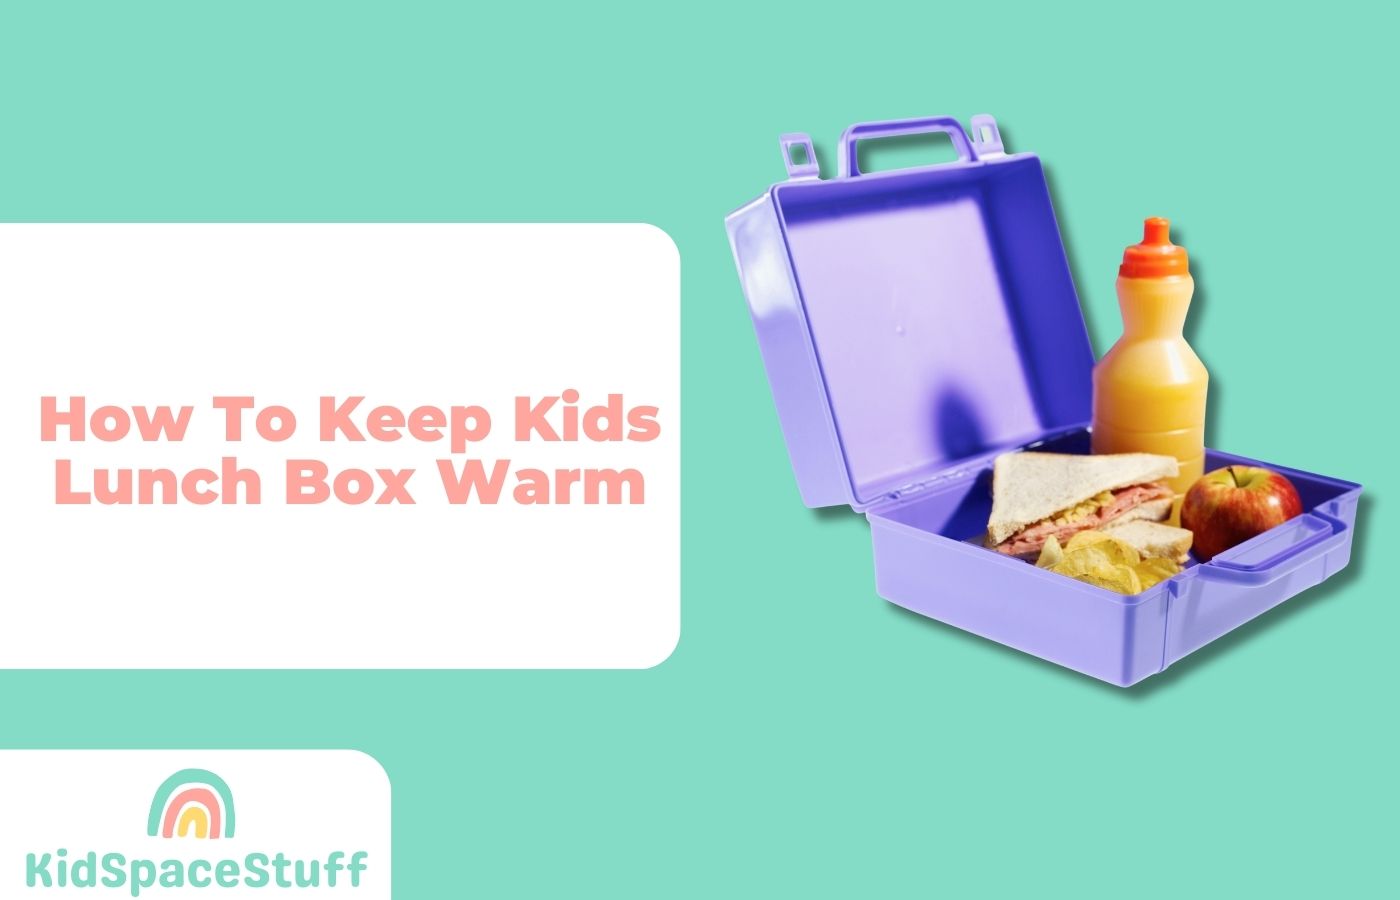 How To Keep Kids Lunch Box Warm (Quick Guide!)